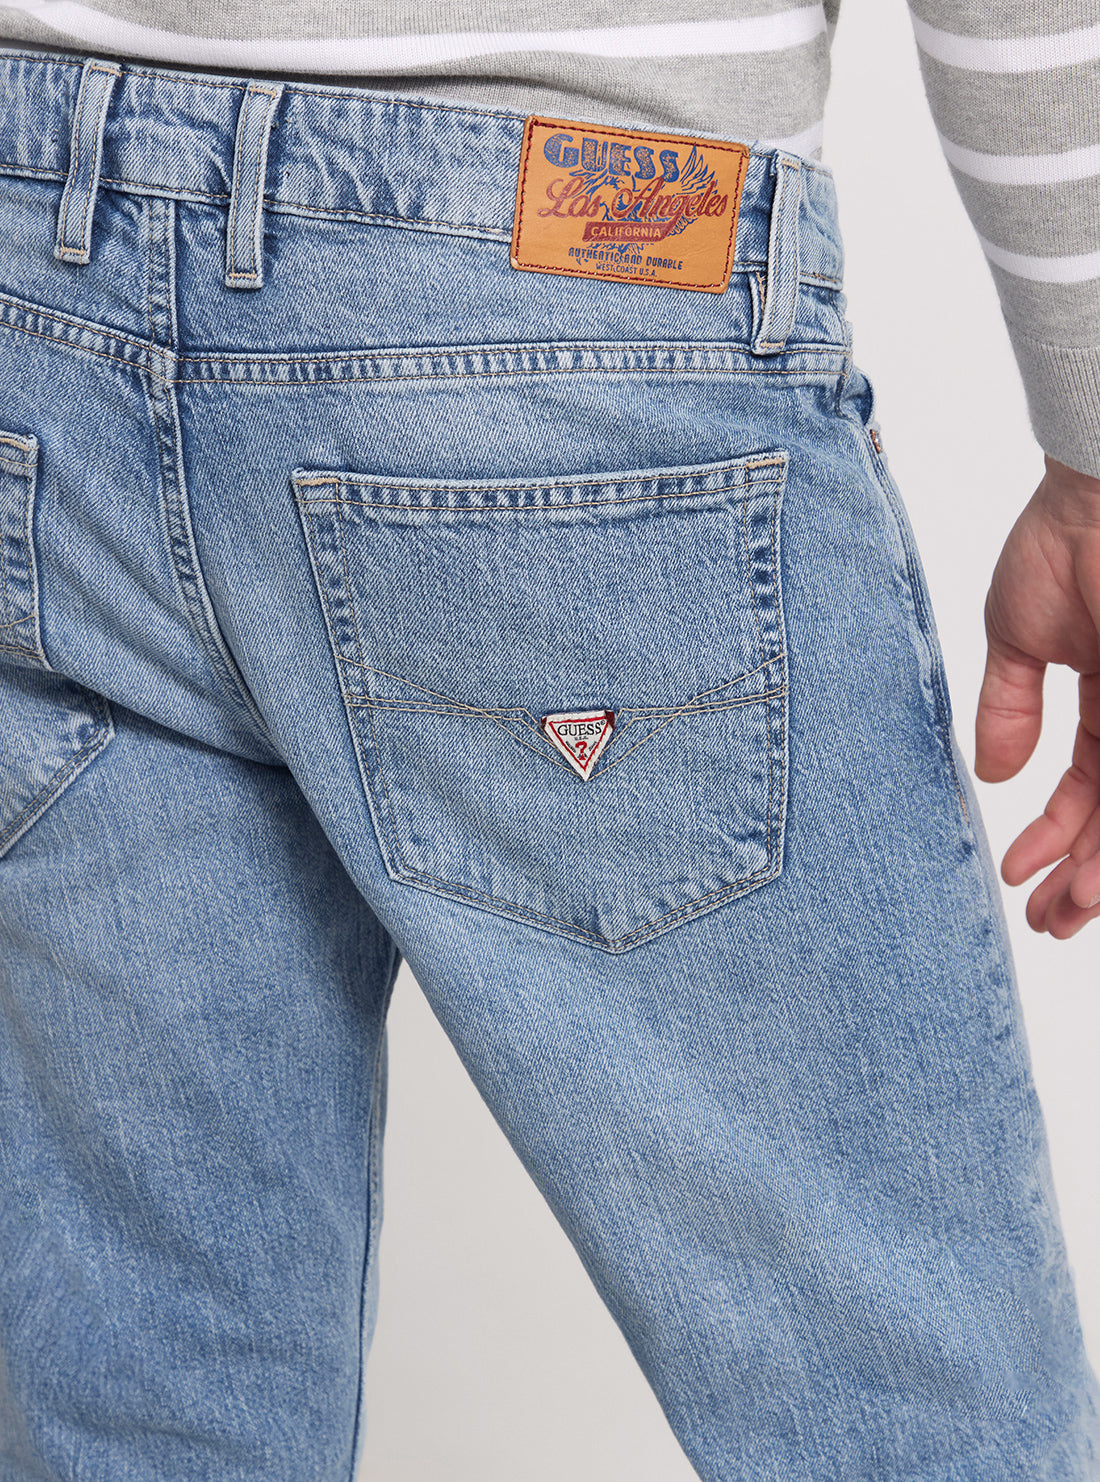 GUESS Low Rise Slim Tapered Denim Jeans in Light Wash detail view